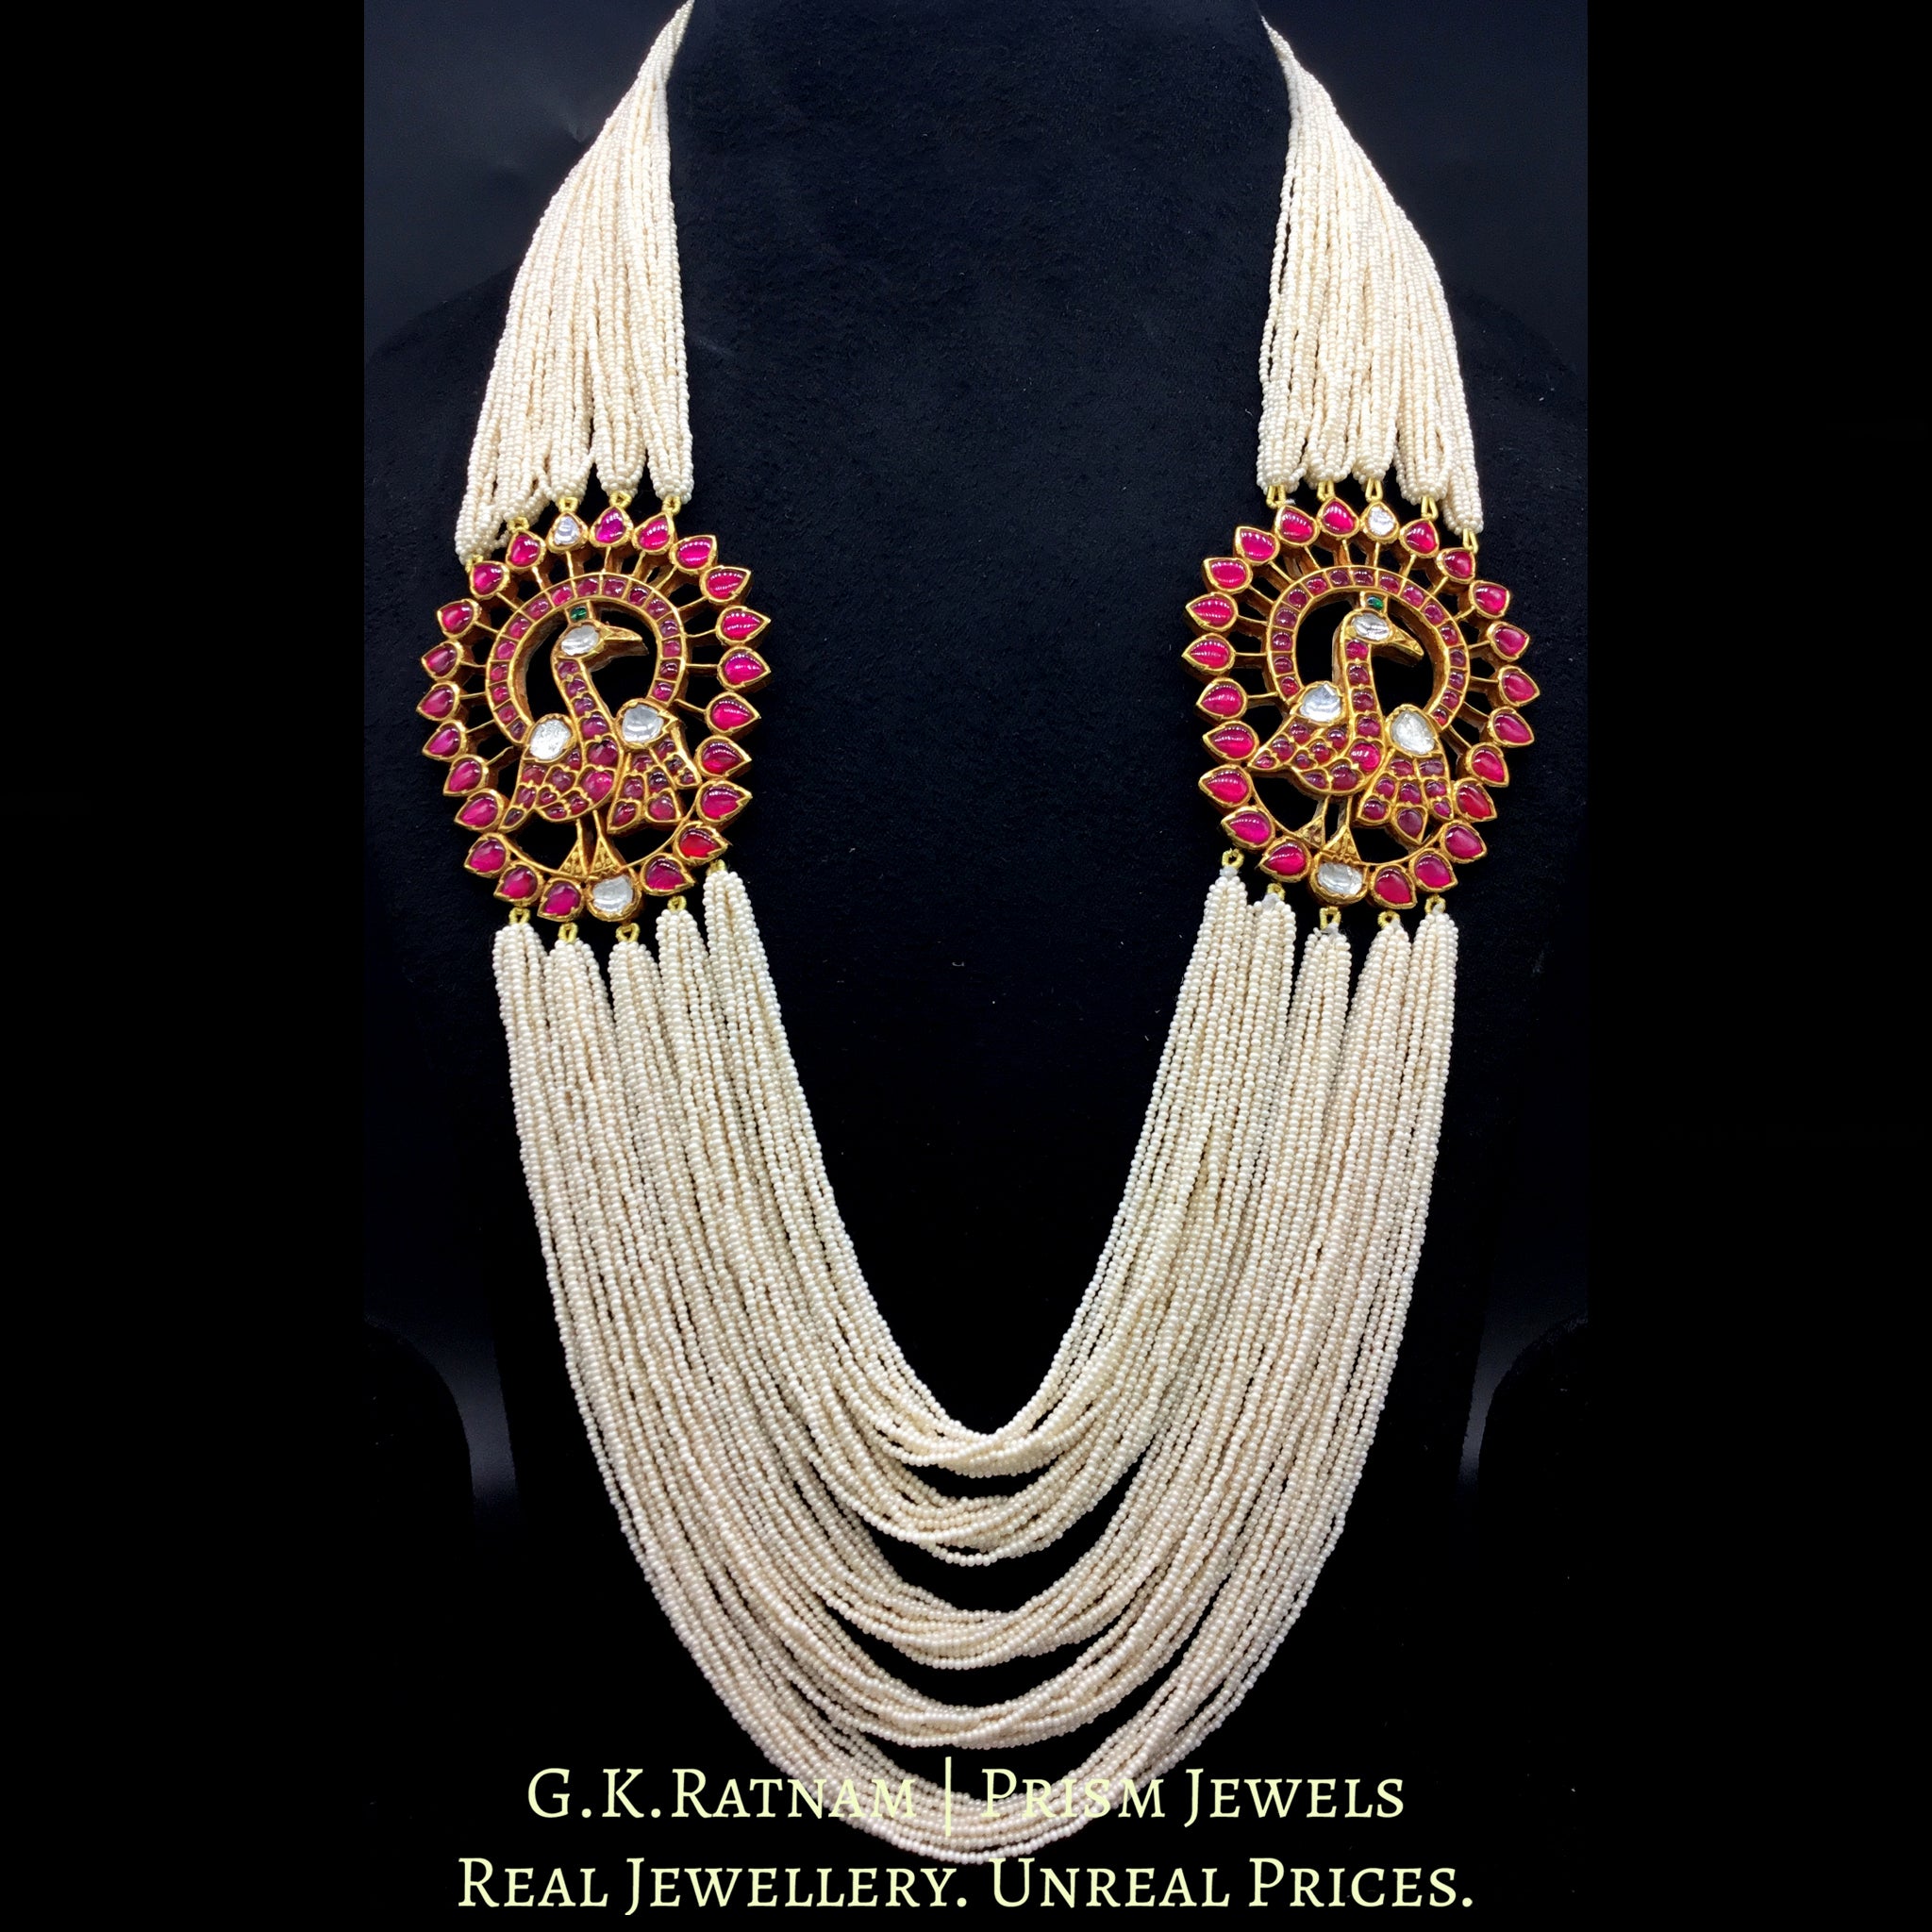 22k Gold and Diamond Polki Peacock Broach Necklace with Rubies and Chid Pearls